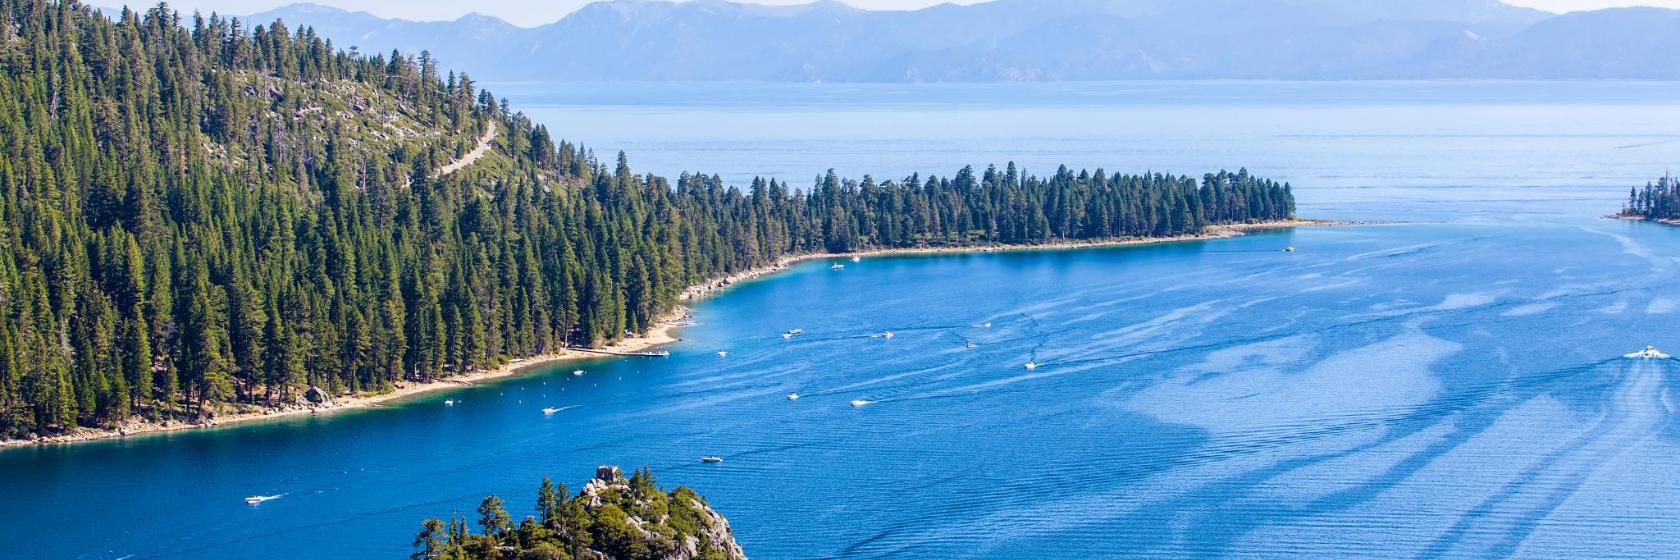 North Lake Tahoe Hotels with Guaranteed Best Rate